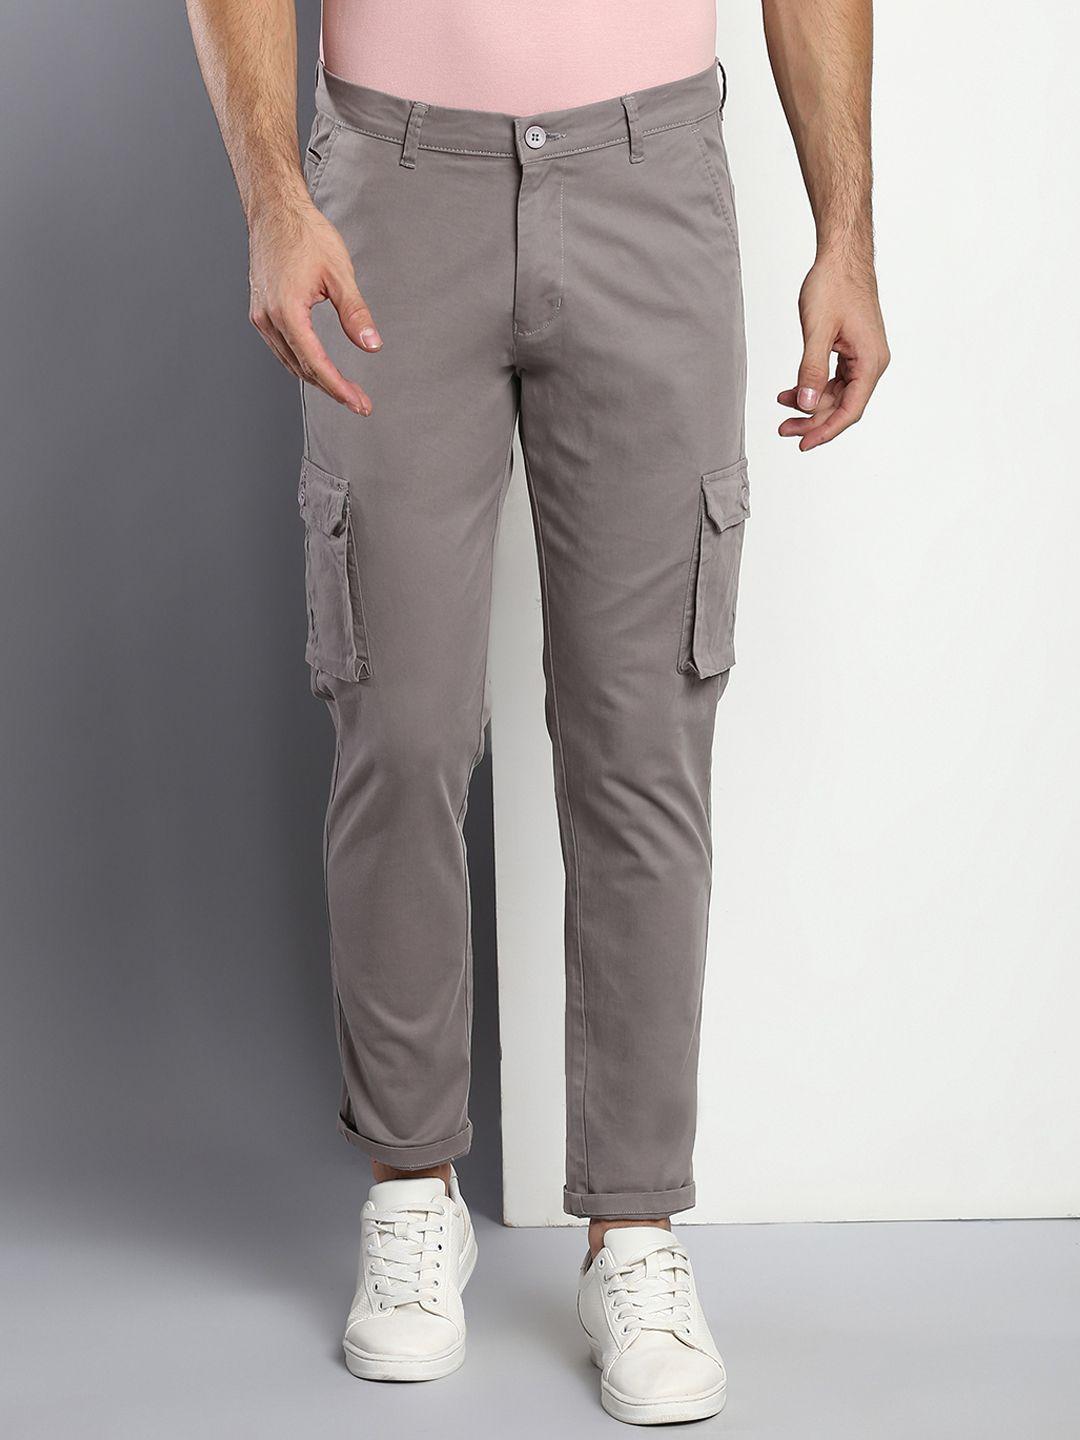 dennis lingo men grey tapered fit cotton cargos trousers